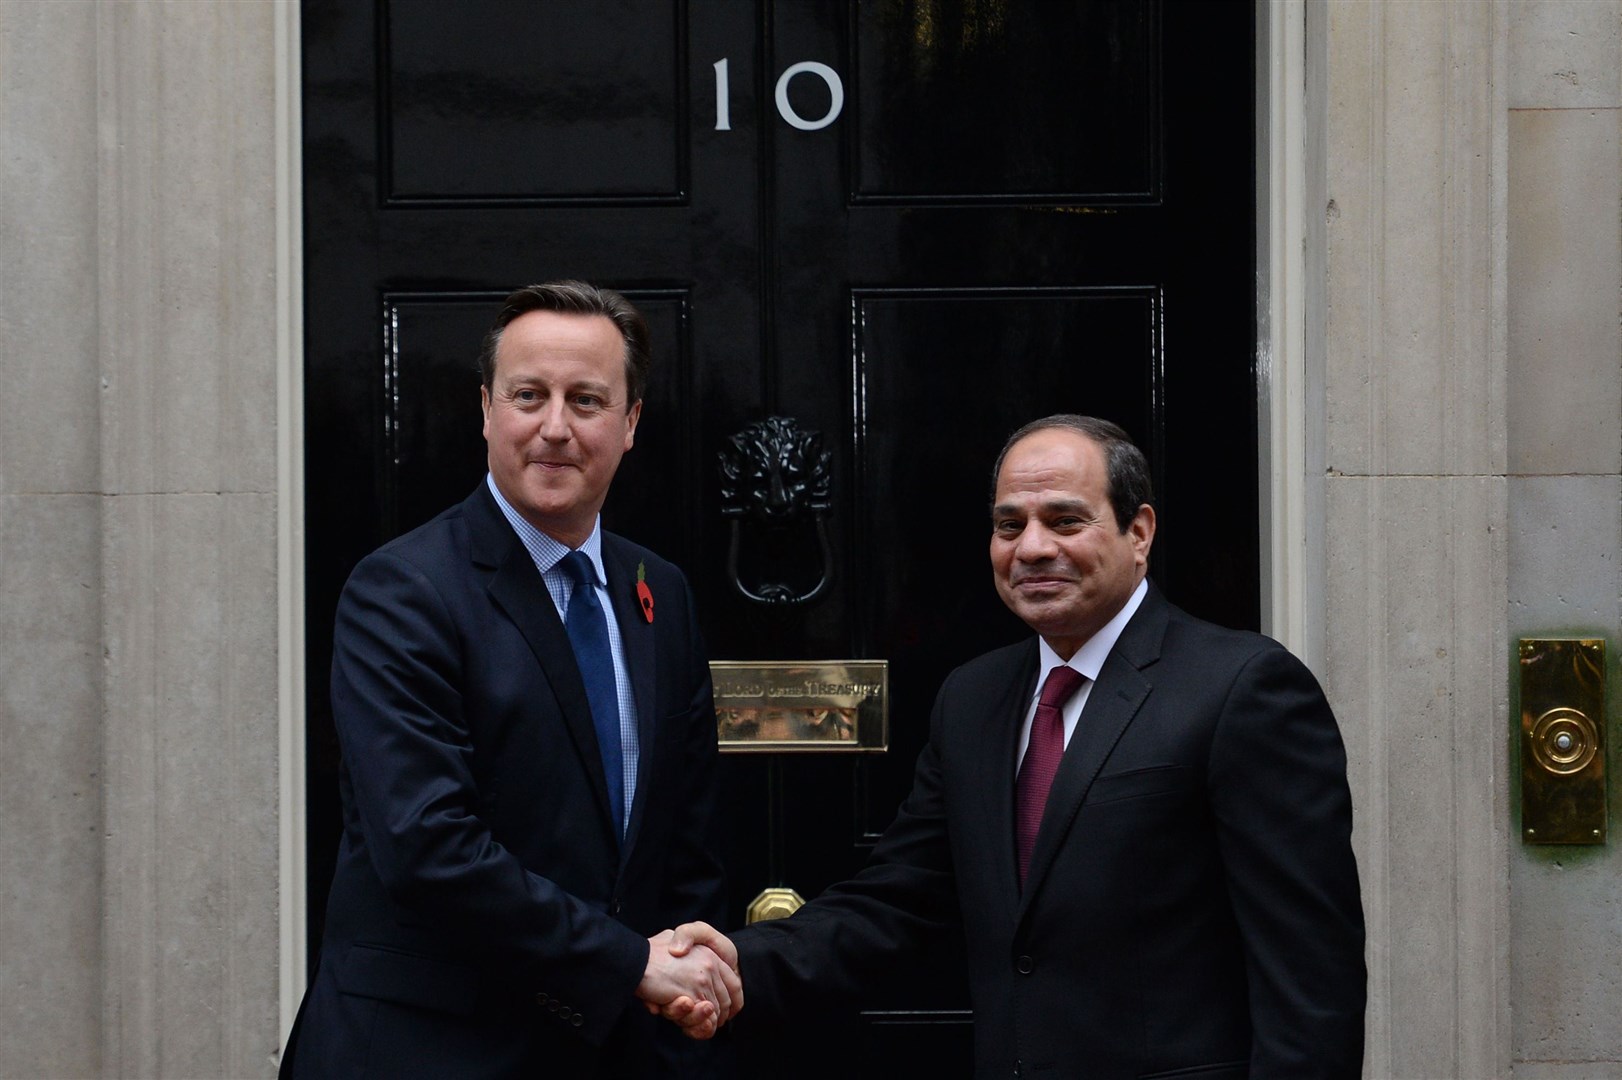 David Cameron previously met Egyptian president Abdel Fatah el-Sisi while prime minister in 2015 (Stefan Rousseau/PA)